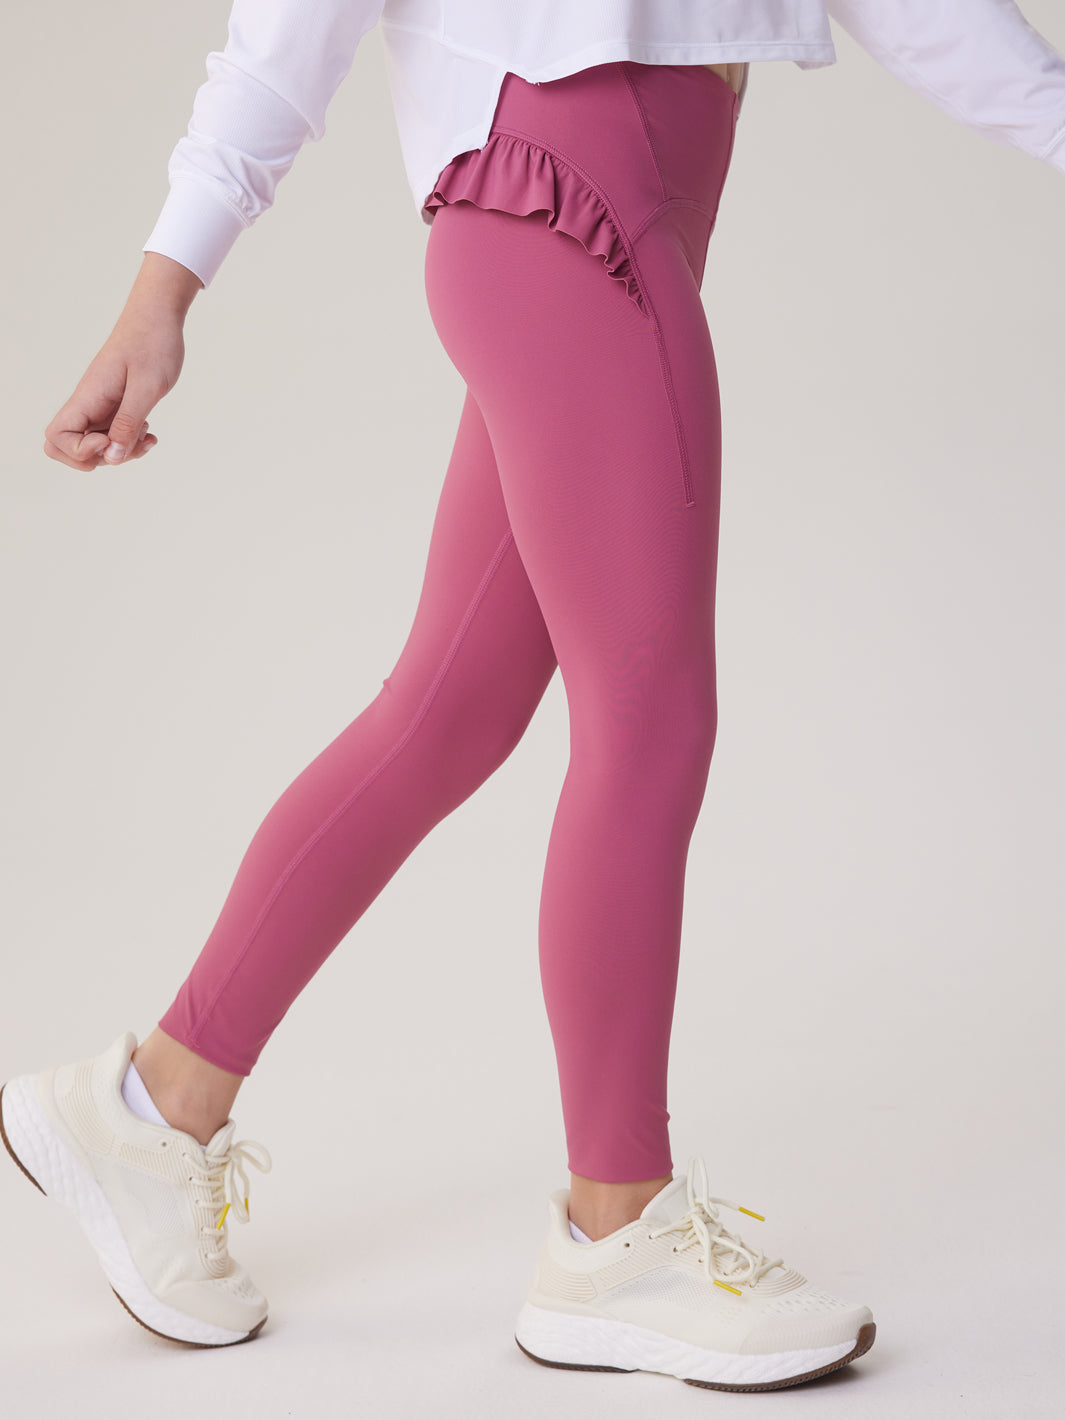 High Waist Layered Ruffle Skirted Leggings With 3 Button Mini Skirt For  Women Solid Color Fitness Pants From Lu003, $31.24